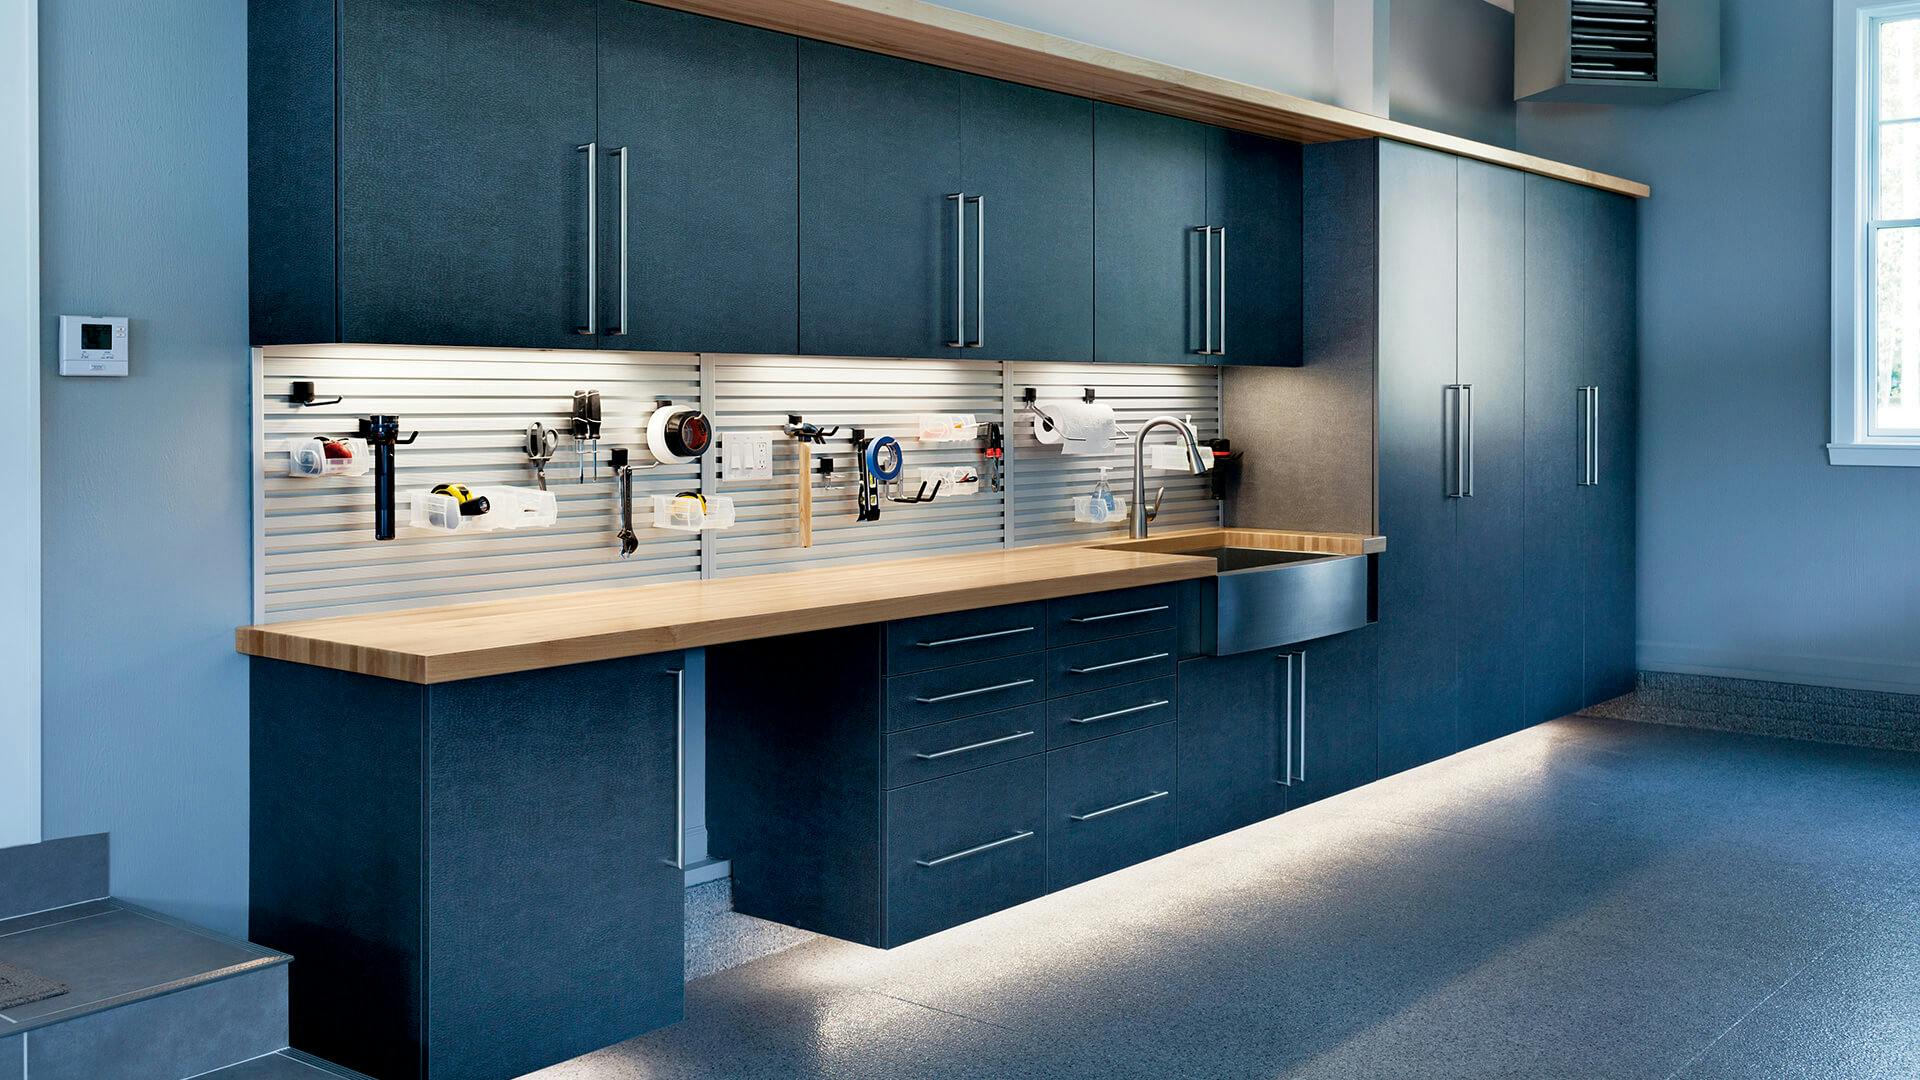 All blue modern garage cabinetry and work bench, blue walls and blue cabinets with tape lighting